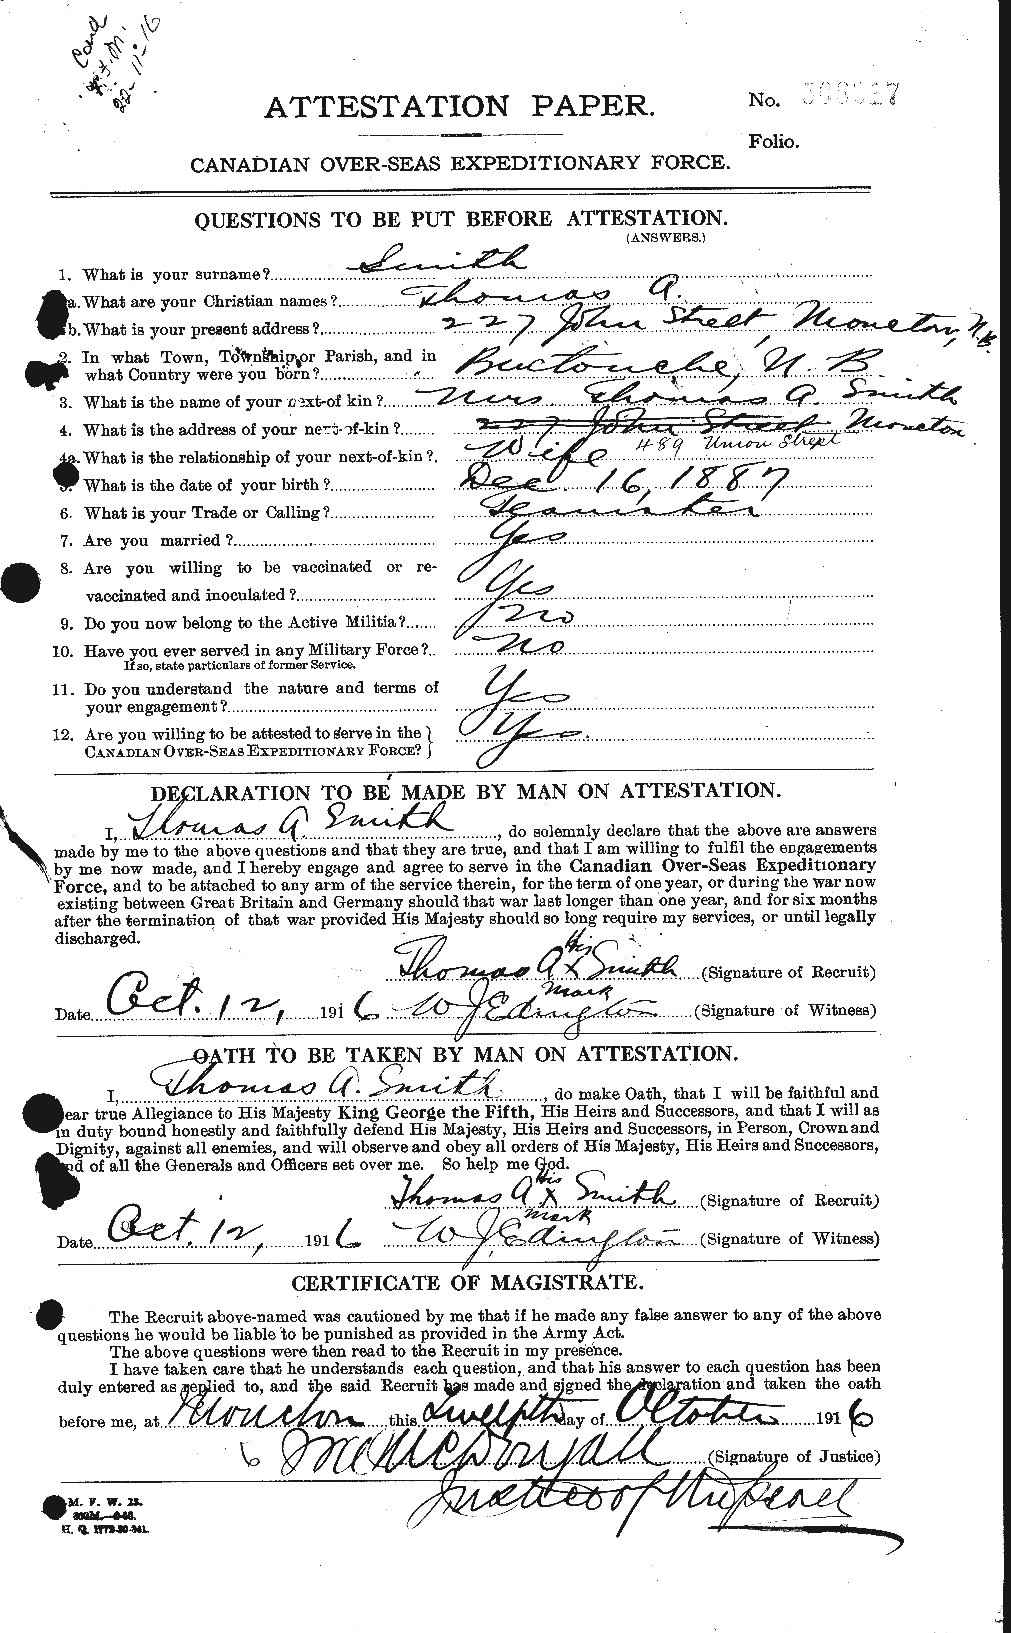 Personnel Records of the First World War - CEF 106675a